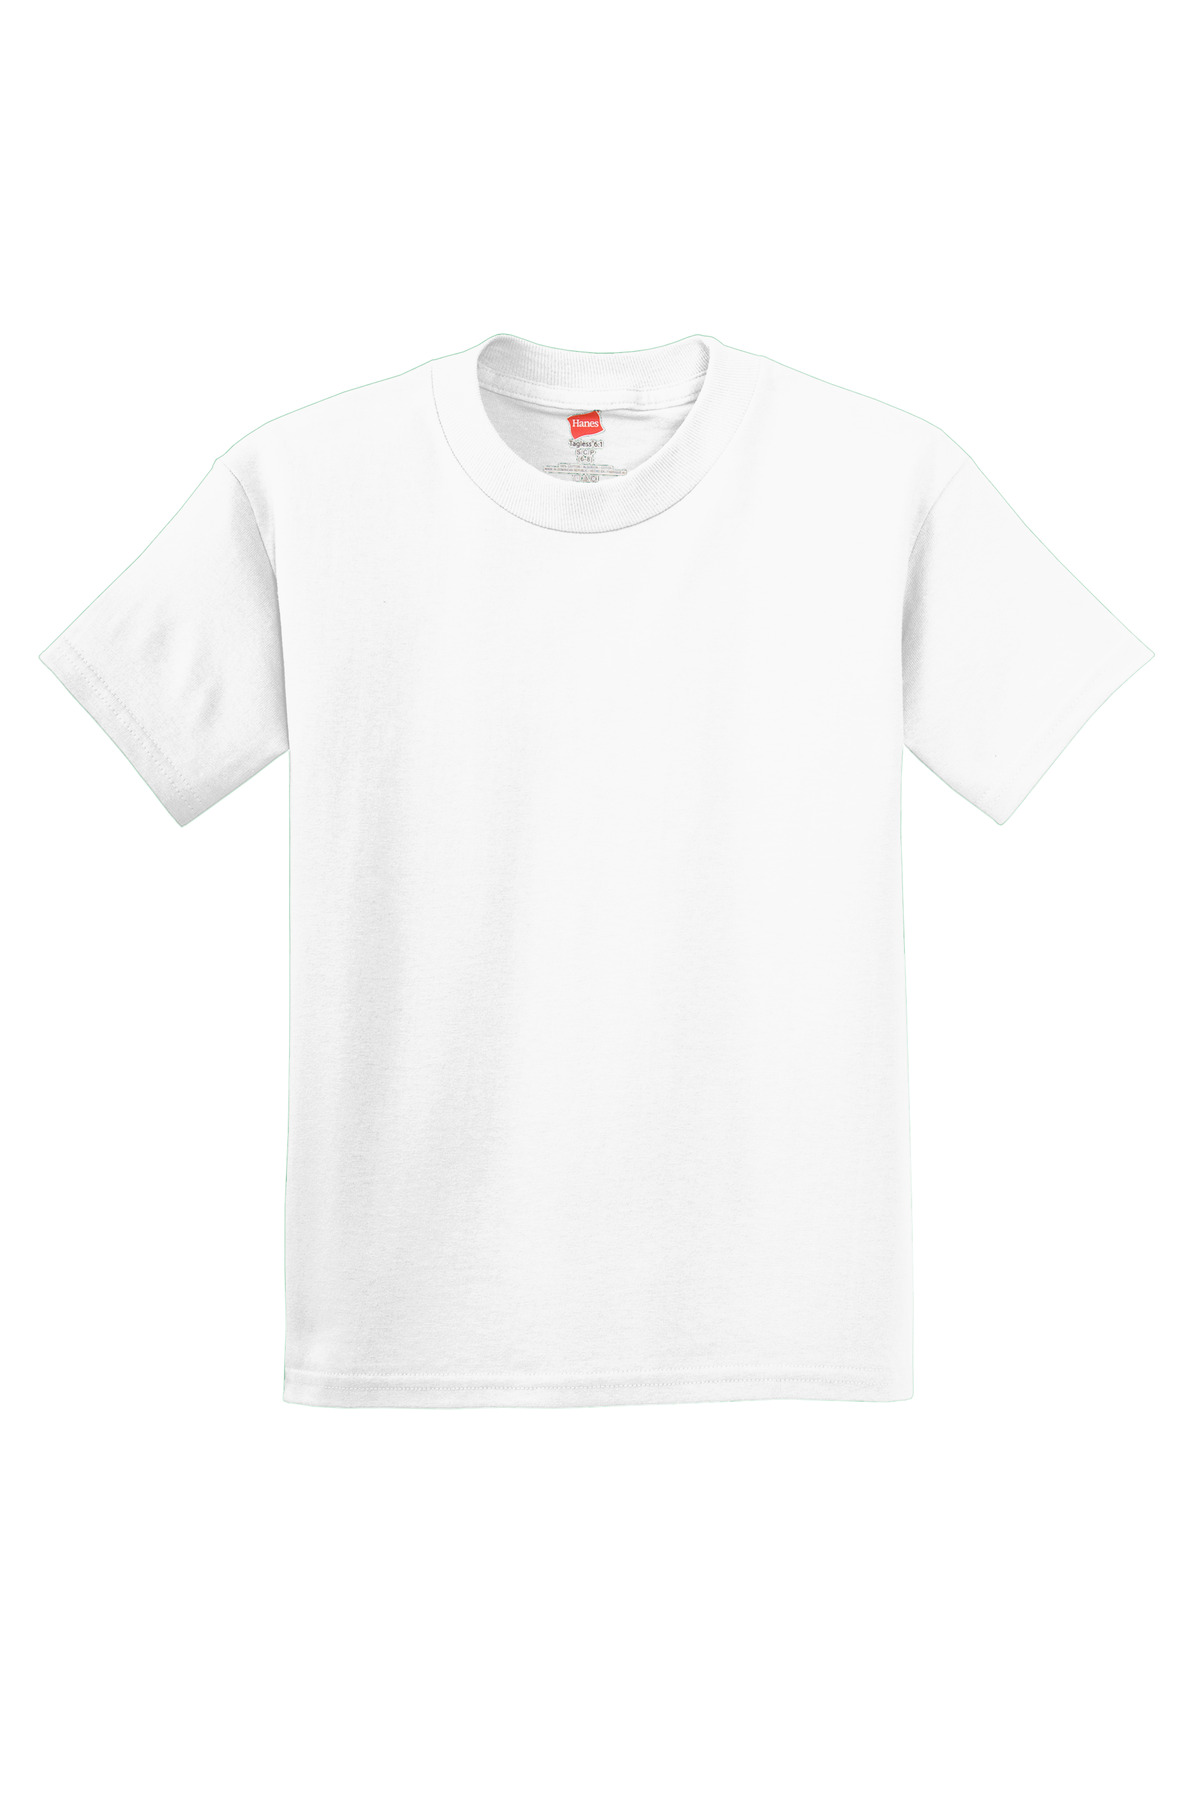 Hanes - Youth Authentic 100% Cotton T-Shirt-